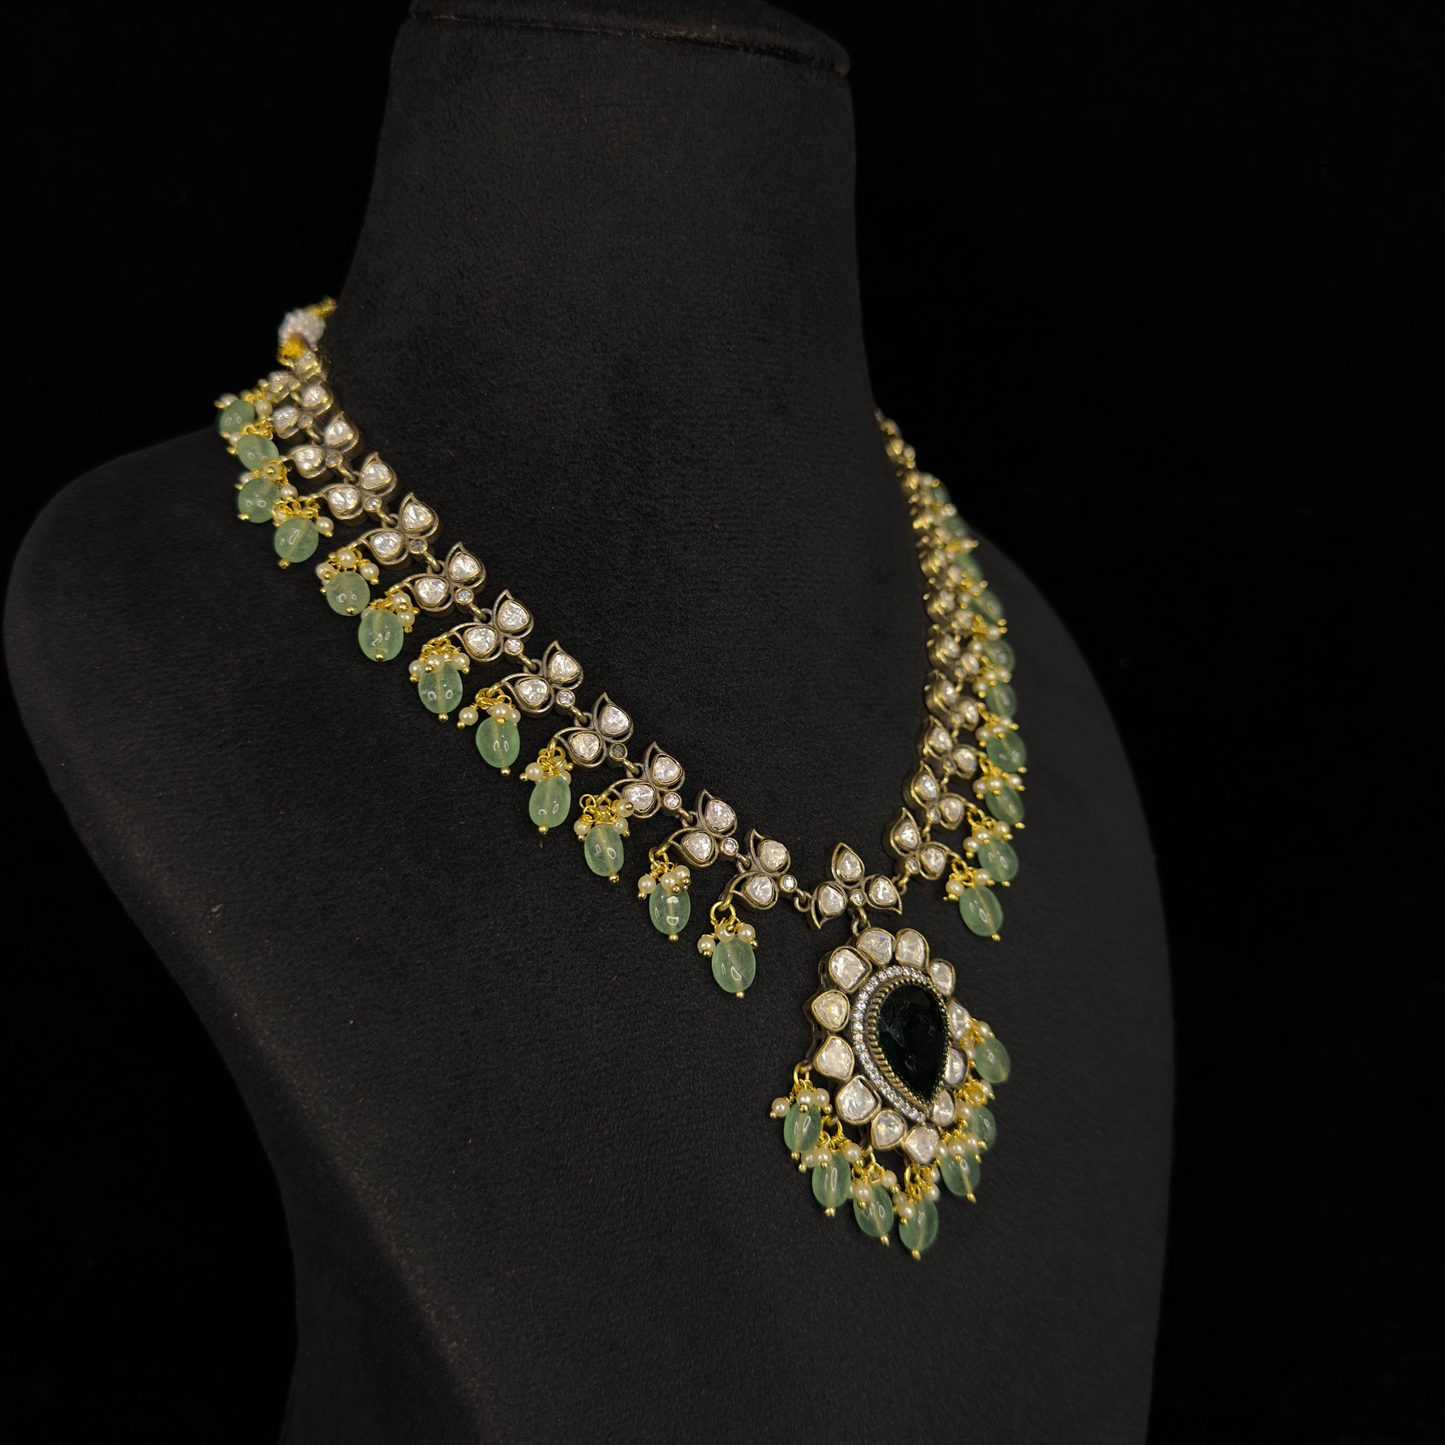 Beauteous Victorian polki Necklace with AD stones